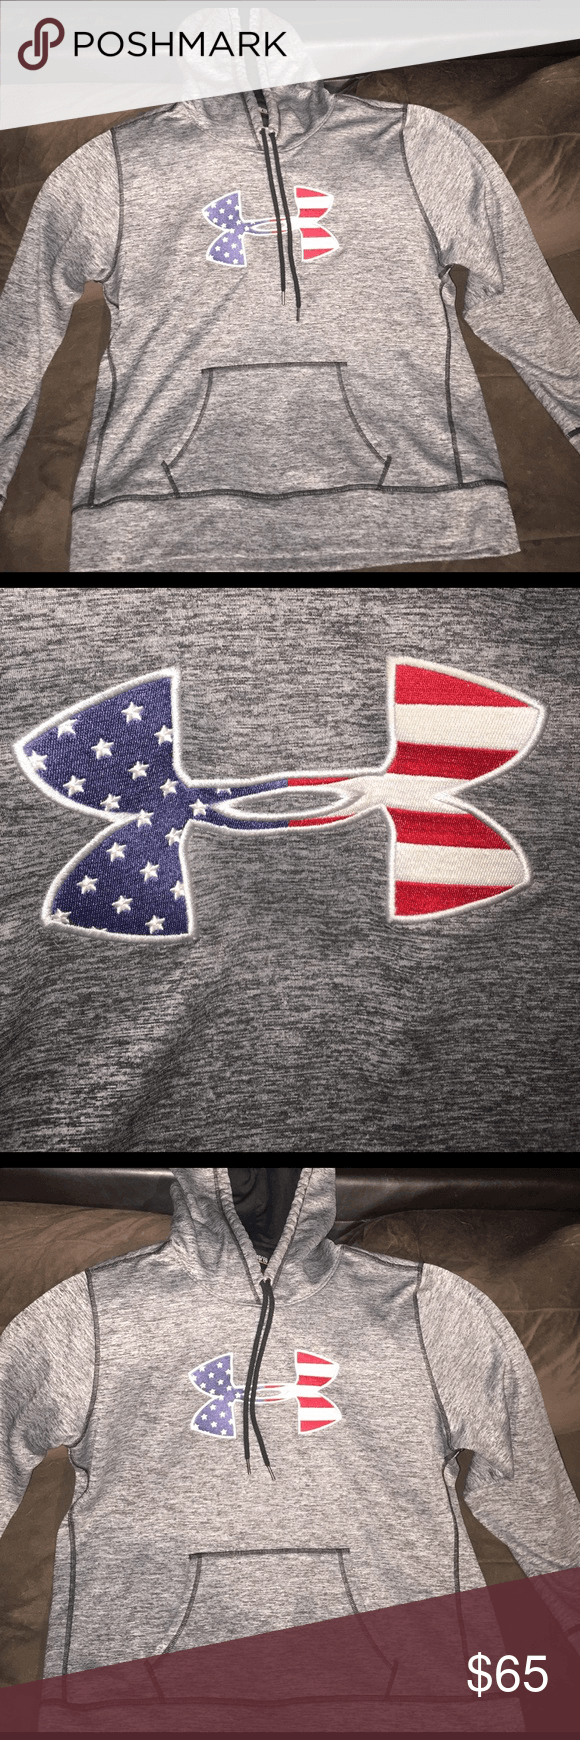 Red and Blue Under Armour Logo - Woman's Under Armour Sweatshirt American Flag Logo Under Armour Gray